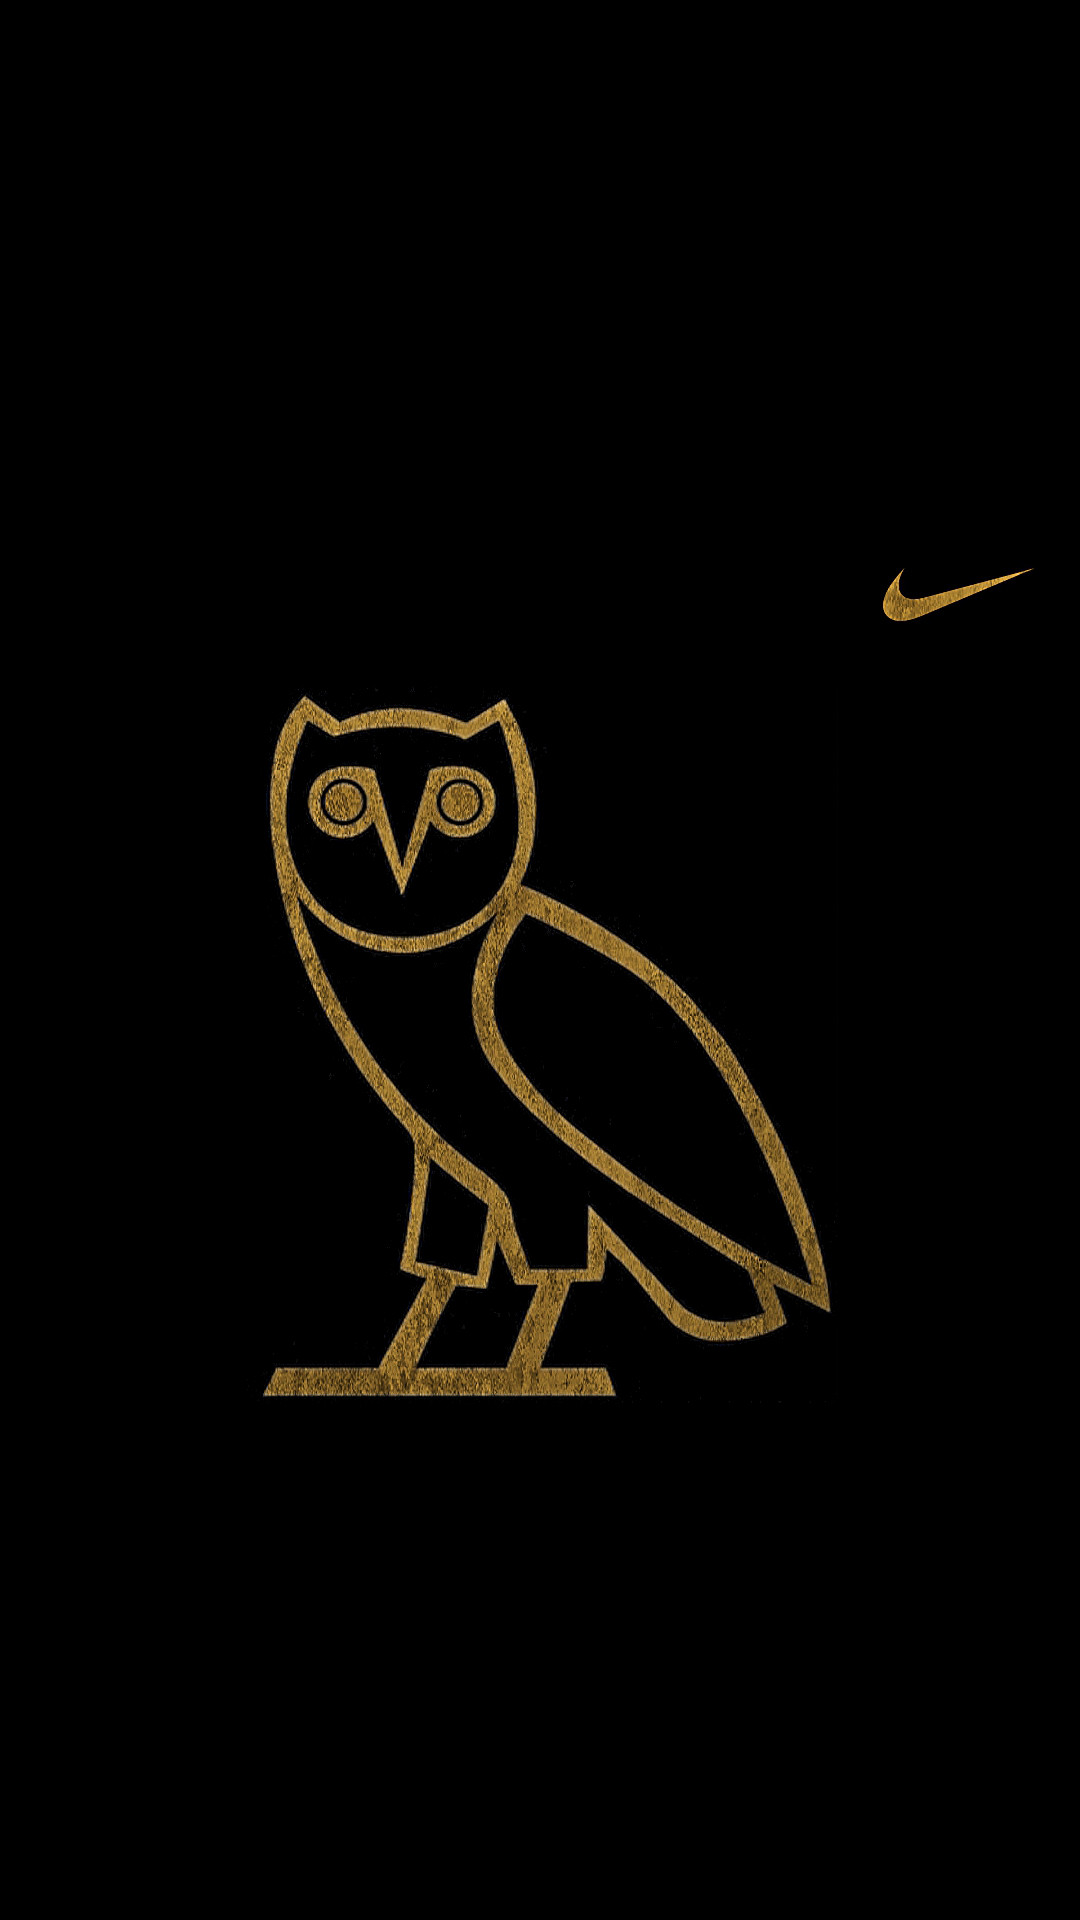 1080x1920 hd nike wallpaper for iphone